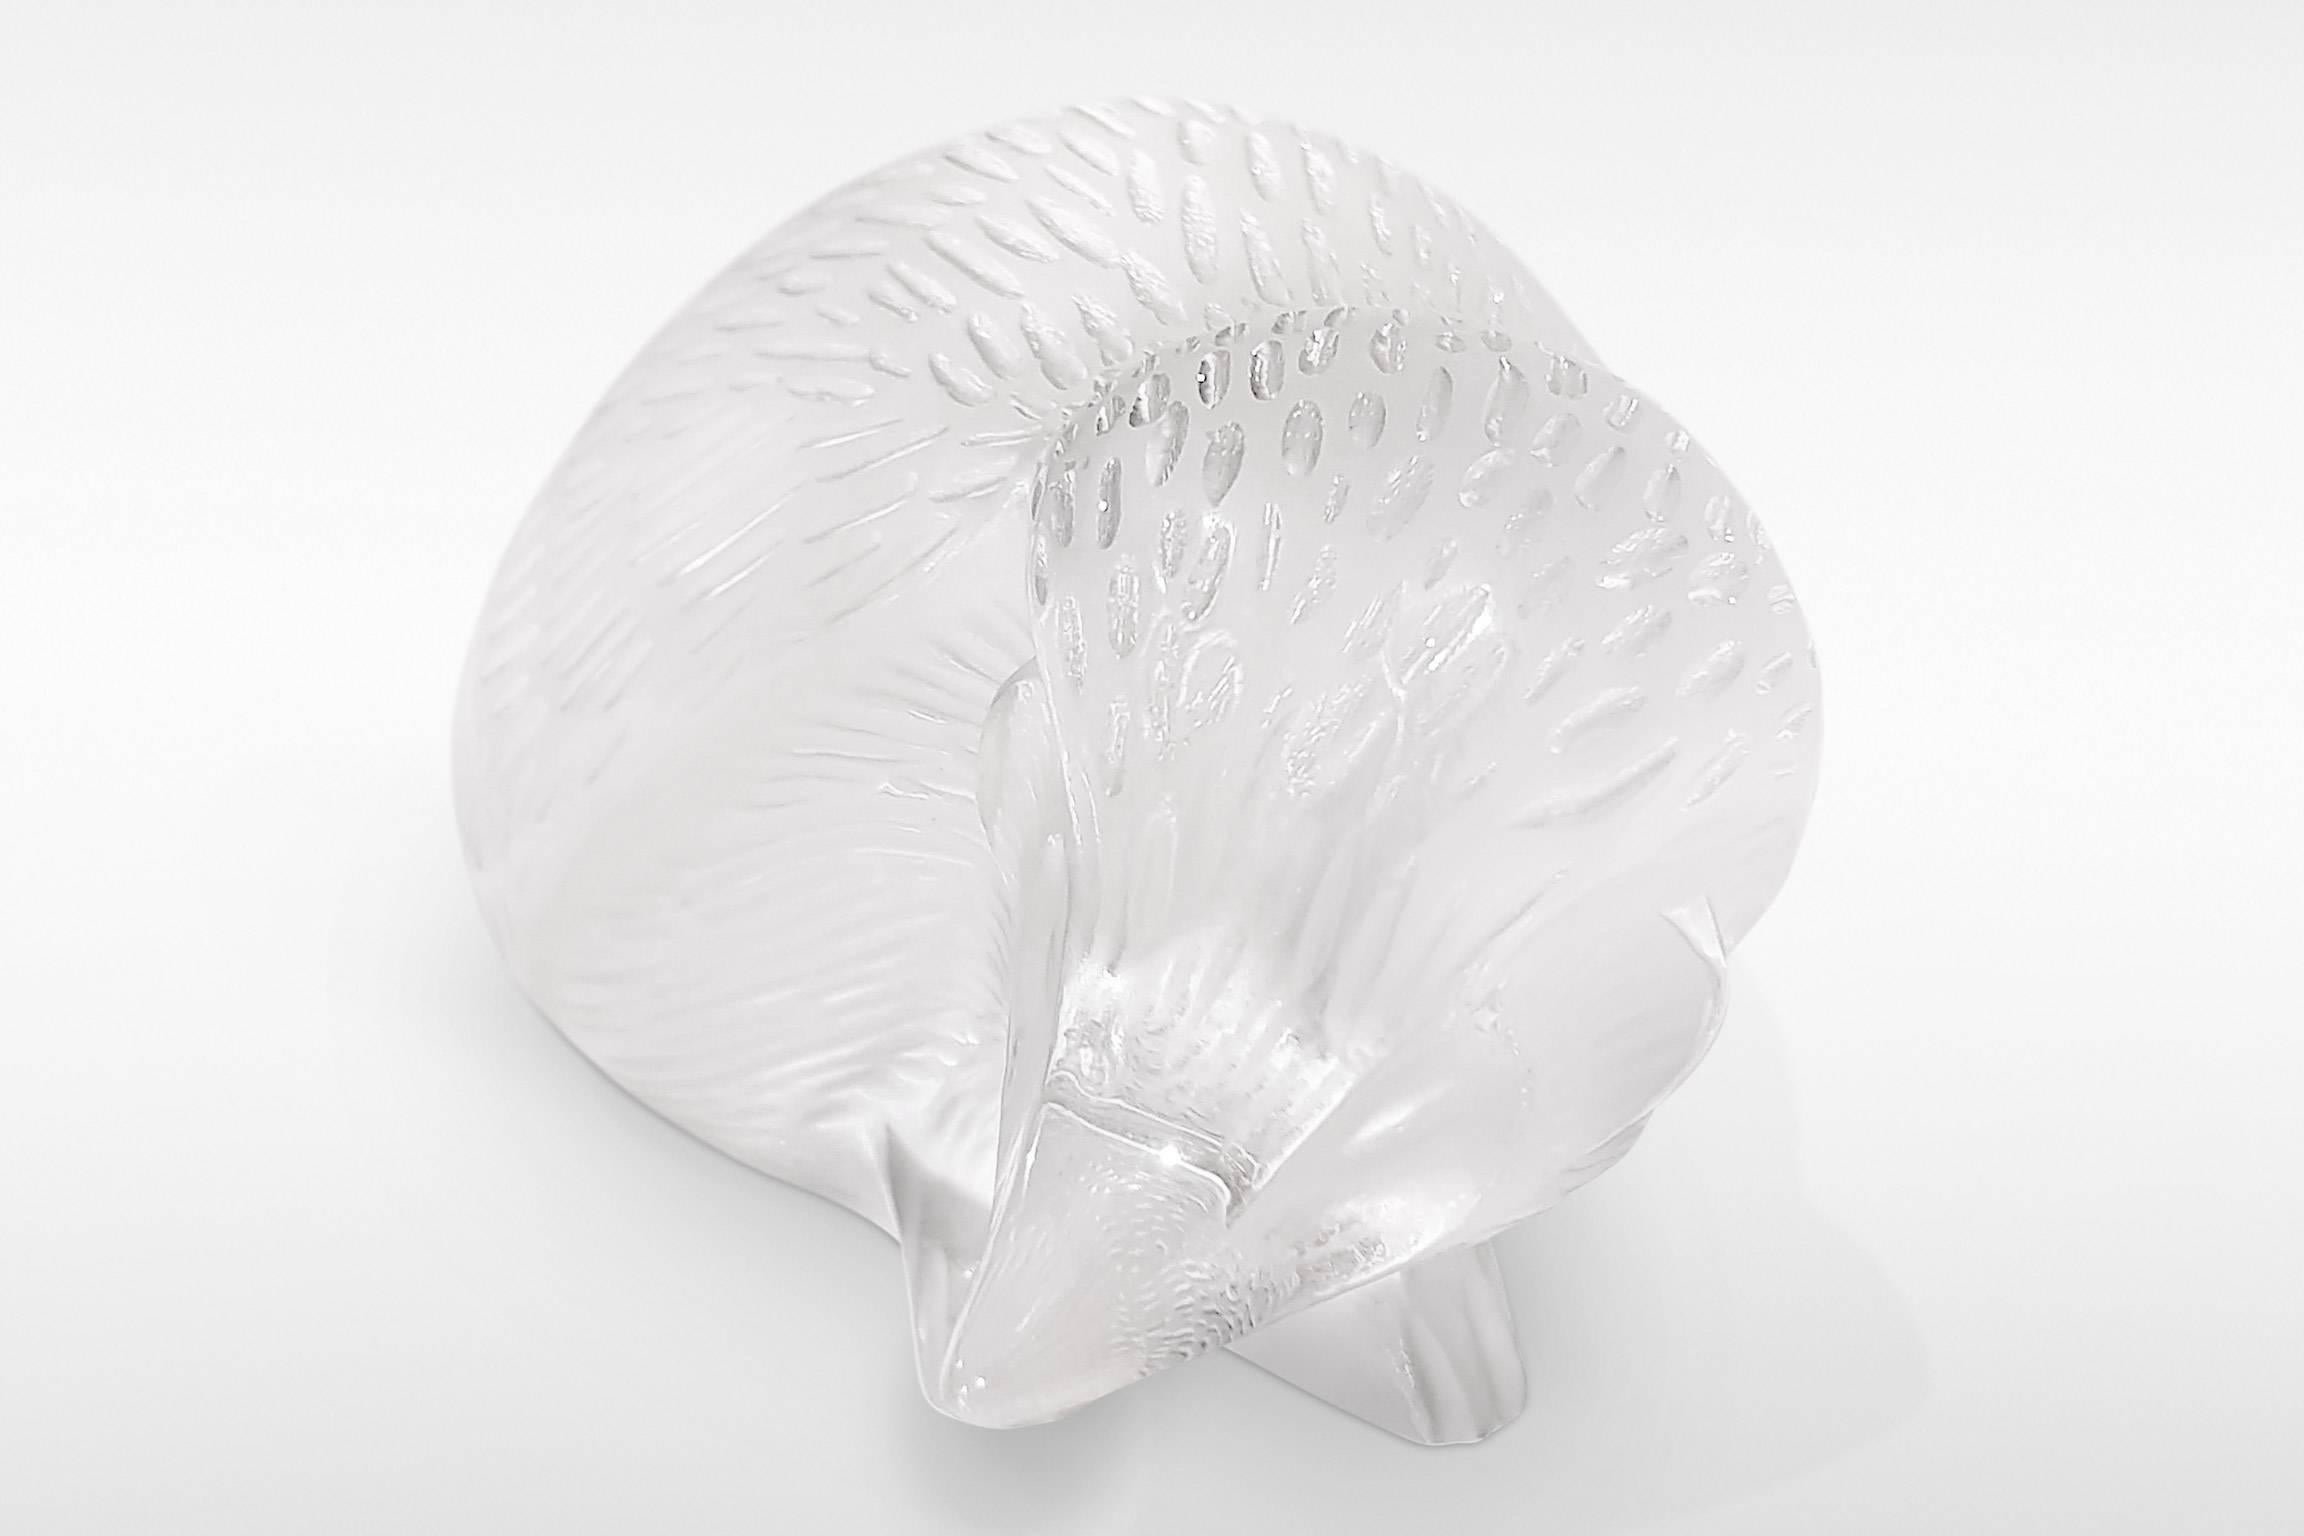 Lalique Hedgehog in frosted and polished glass,
circa 1970.